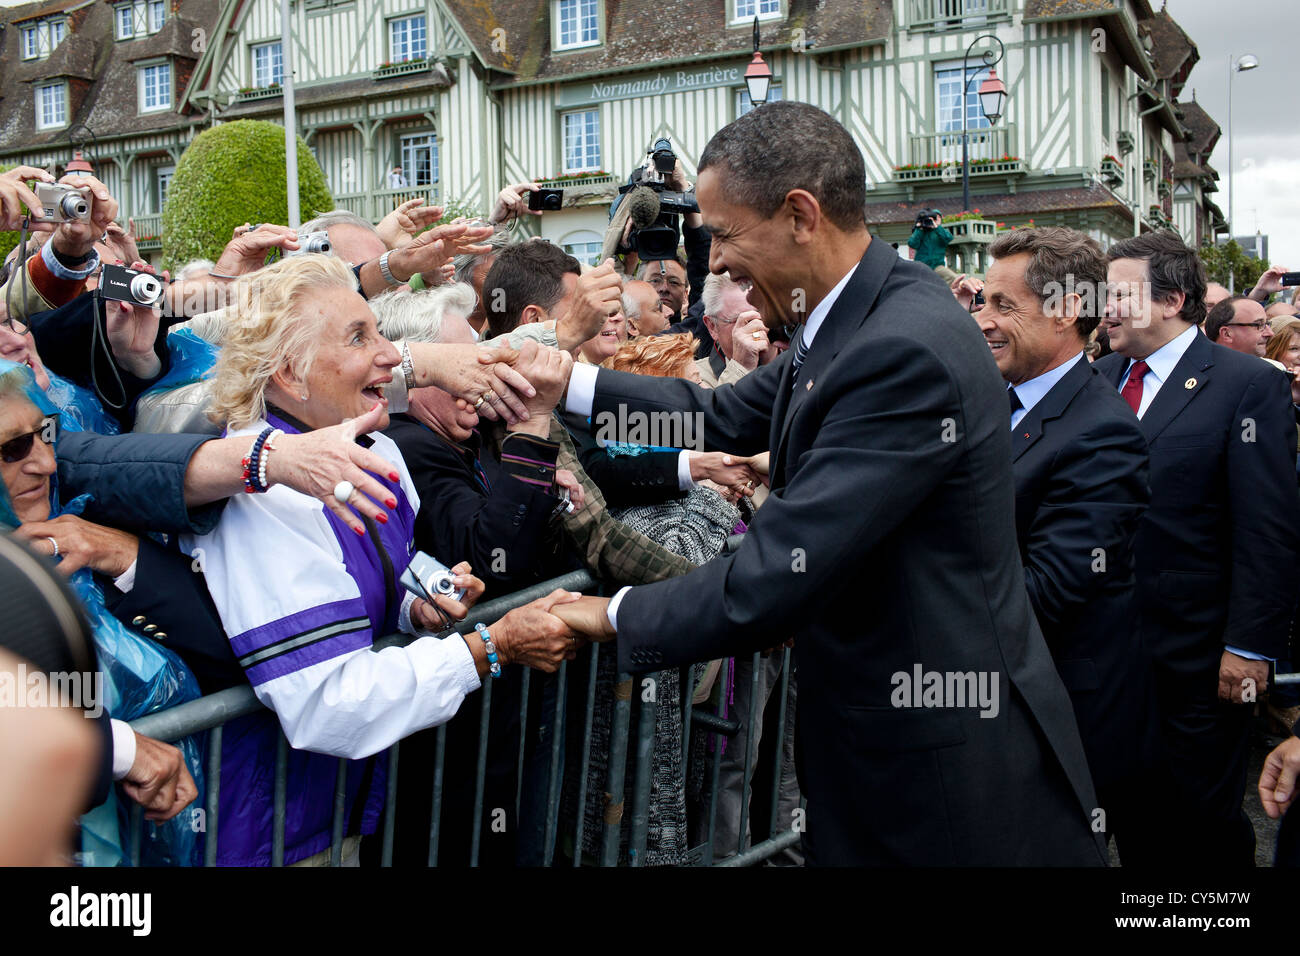 US President Barack Obama, French President Nicolas Sarkozy and European Commission President JosŽ Manuel Barroso greet people on the street before attending the G8 Summit May 26, 2011 in Deauville, France. Stock Photo